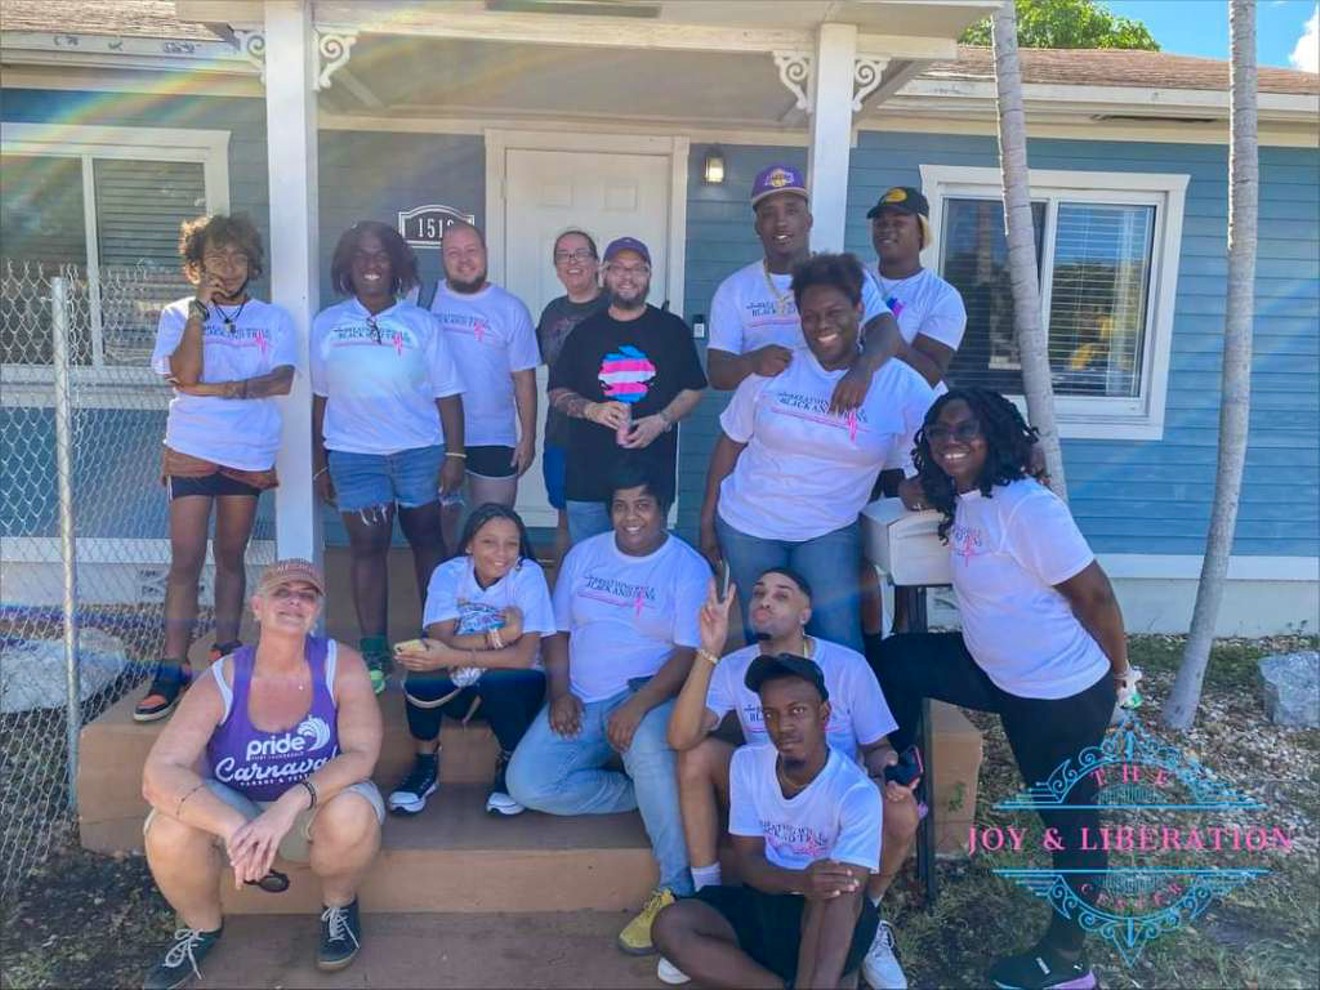 Ashley and Morgan Mayfaire, founders of TransSocial, with organization members at the Joy and Liberation Center in Dania Beach.